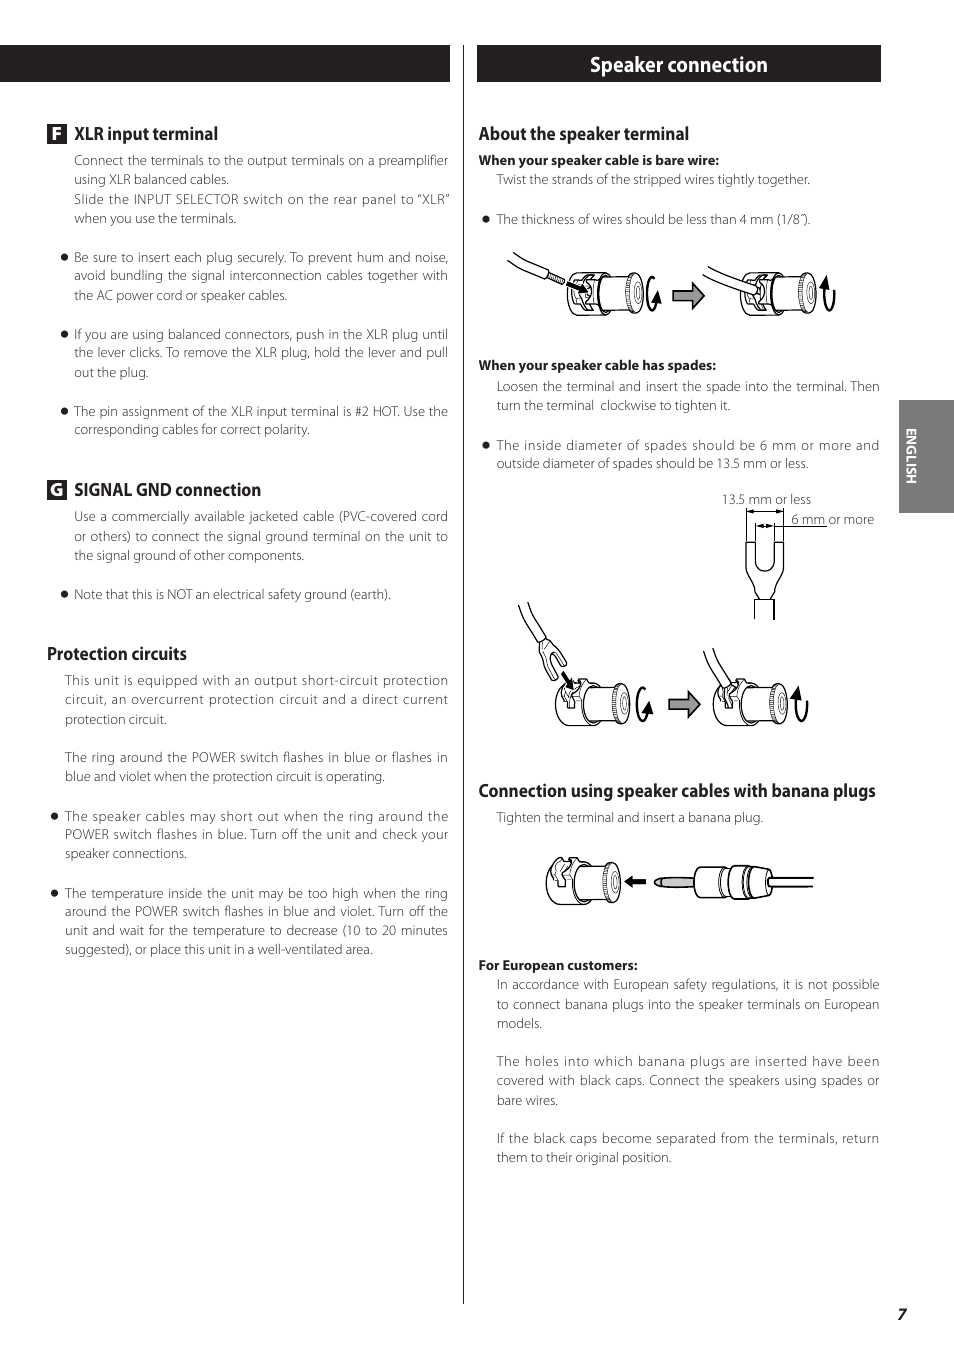 Speaker connection, Fxlr input terminal, Gsignal gnd connection | Protection circuits, About the speaker terminal, Connection using speaker cables with banana plugs | Teac A-03 User Manual | Page 7 / 28